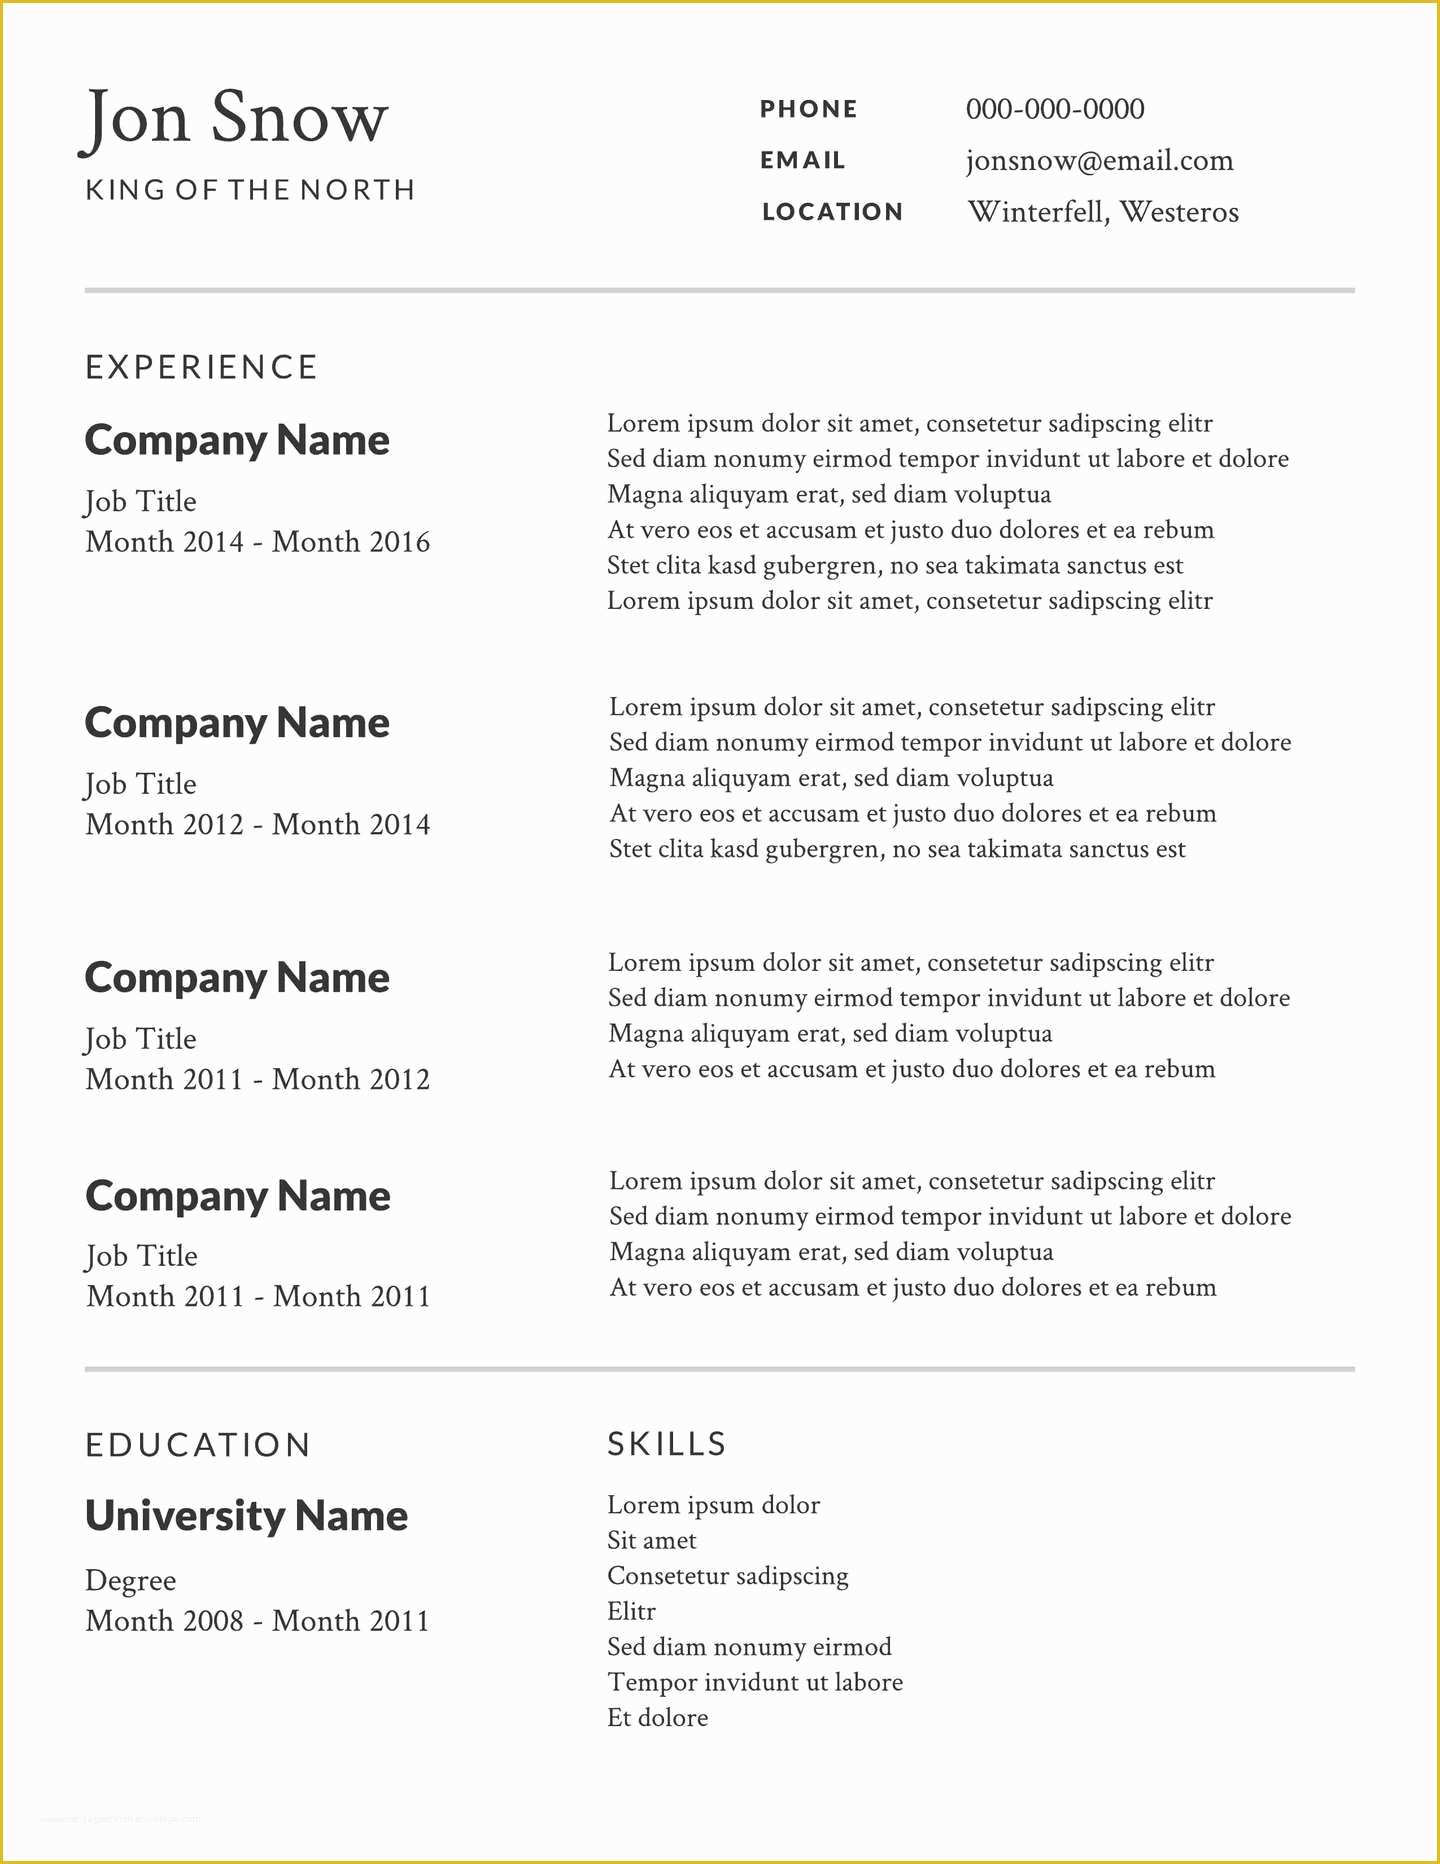 Free Cv Template Of 2 Free Resume Templates & Examples Lucidpress